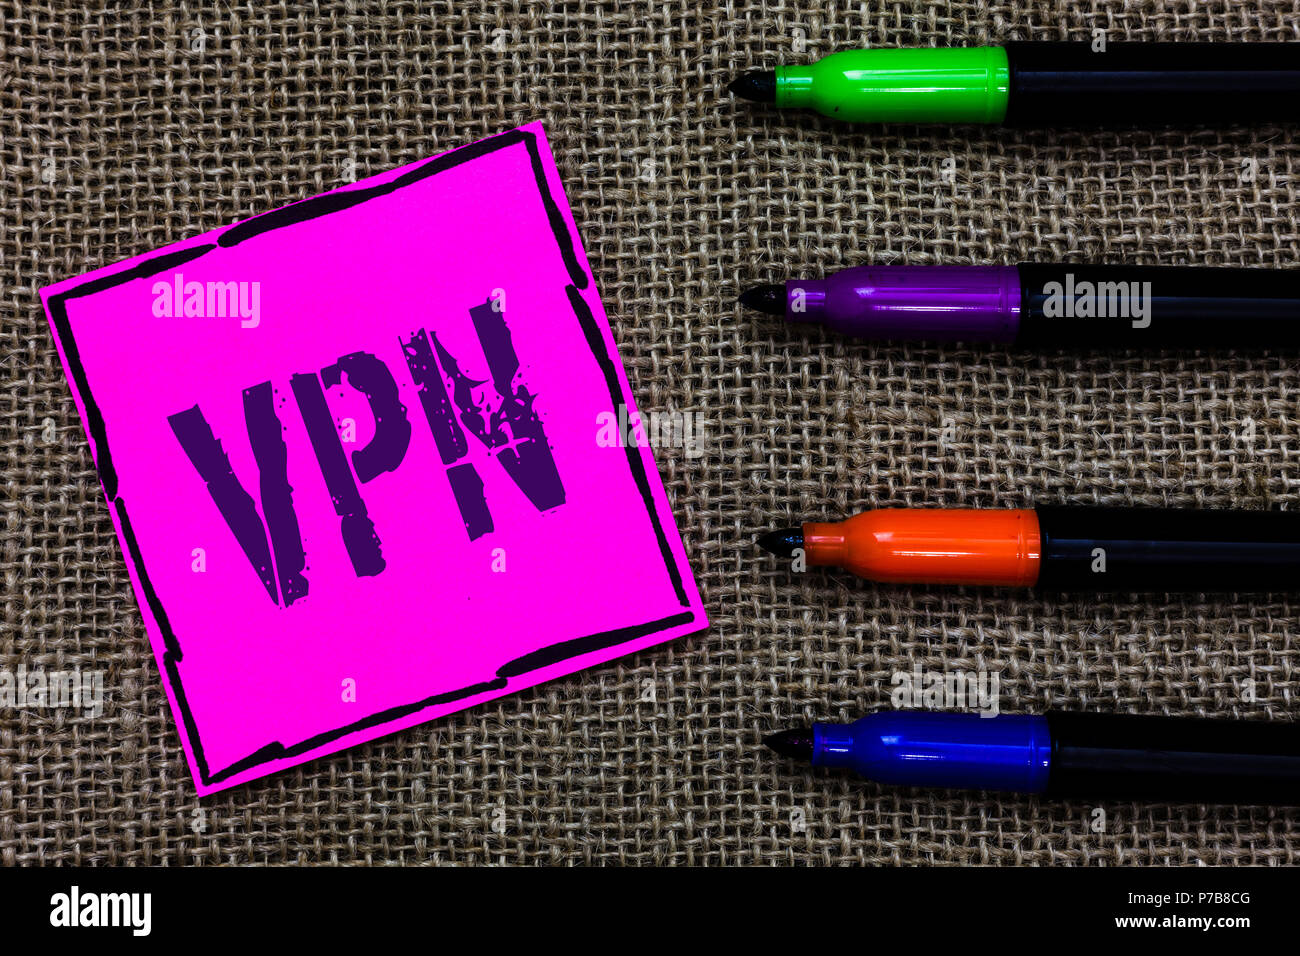 Writing note showing Vpn. Business photo showcasing Secured virtual private network across confidential domain protected Marker pens art pink paper ni Stock Photo